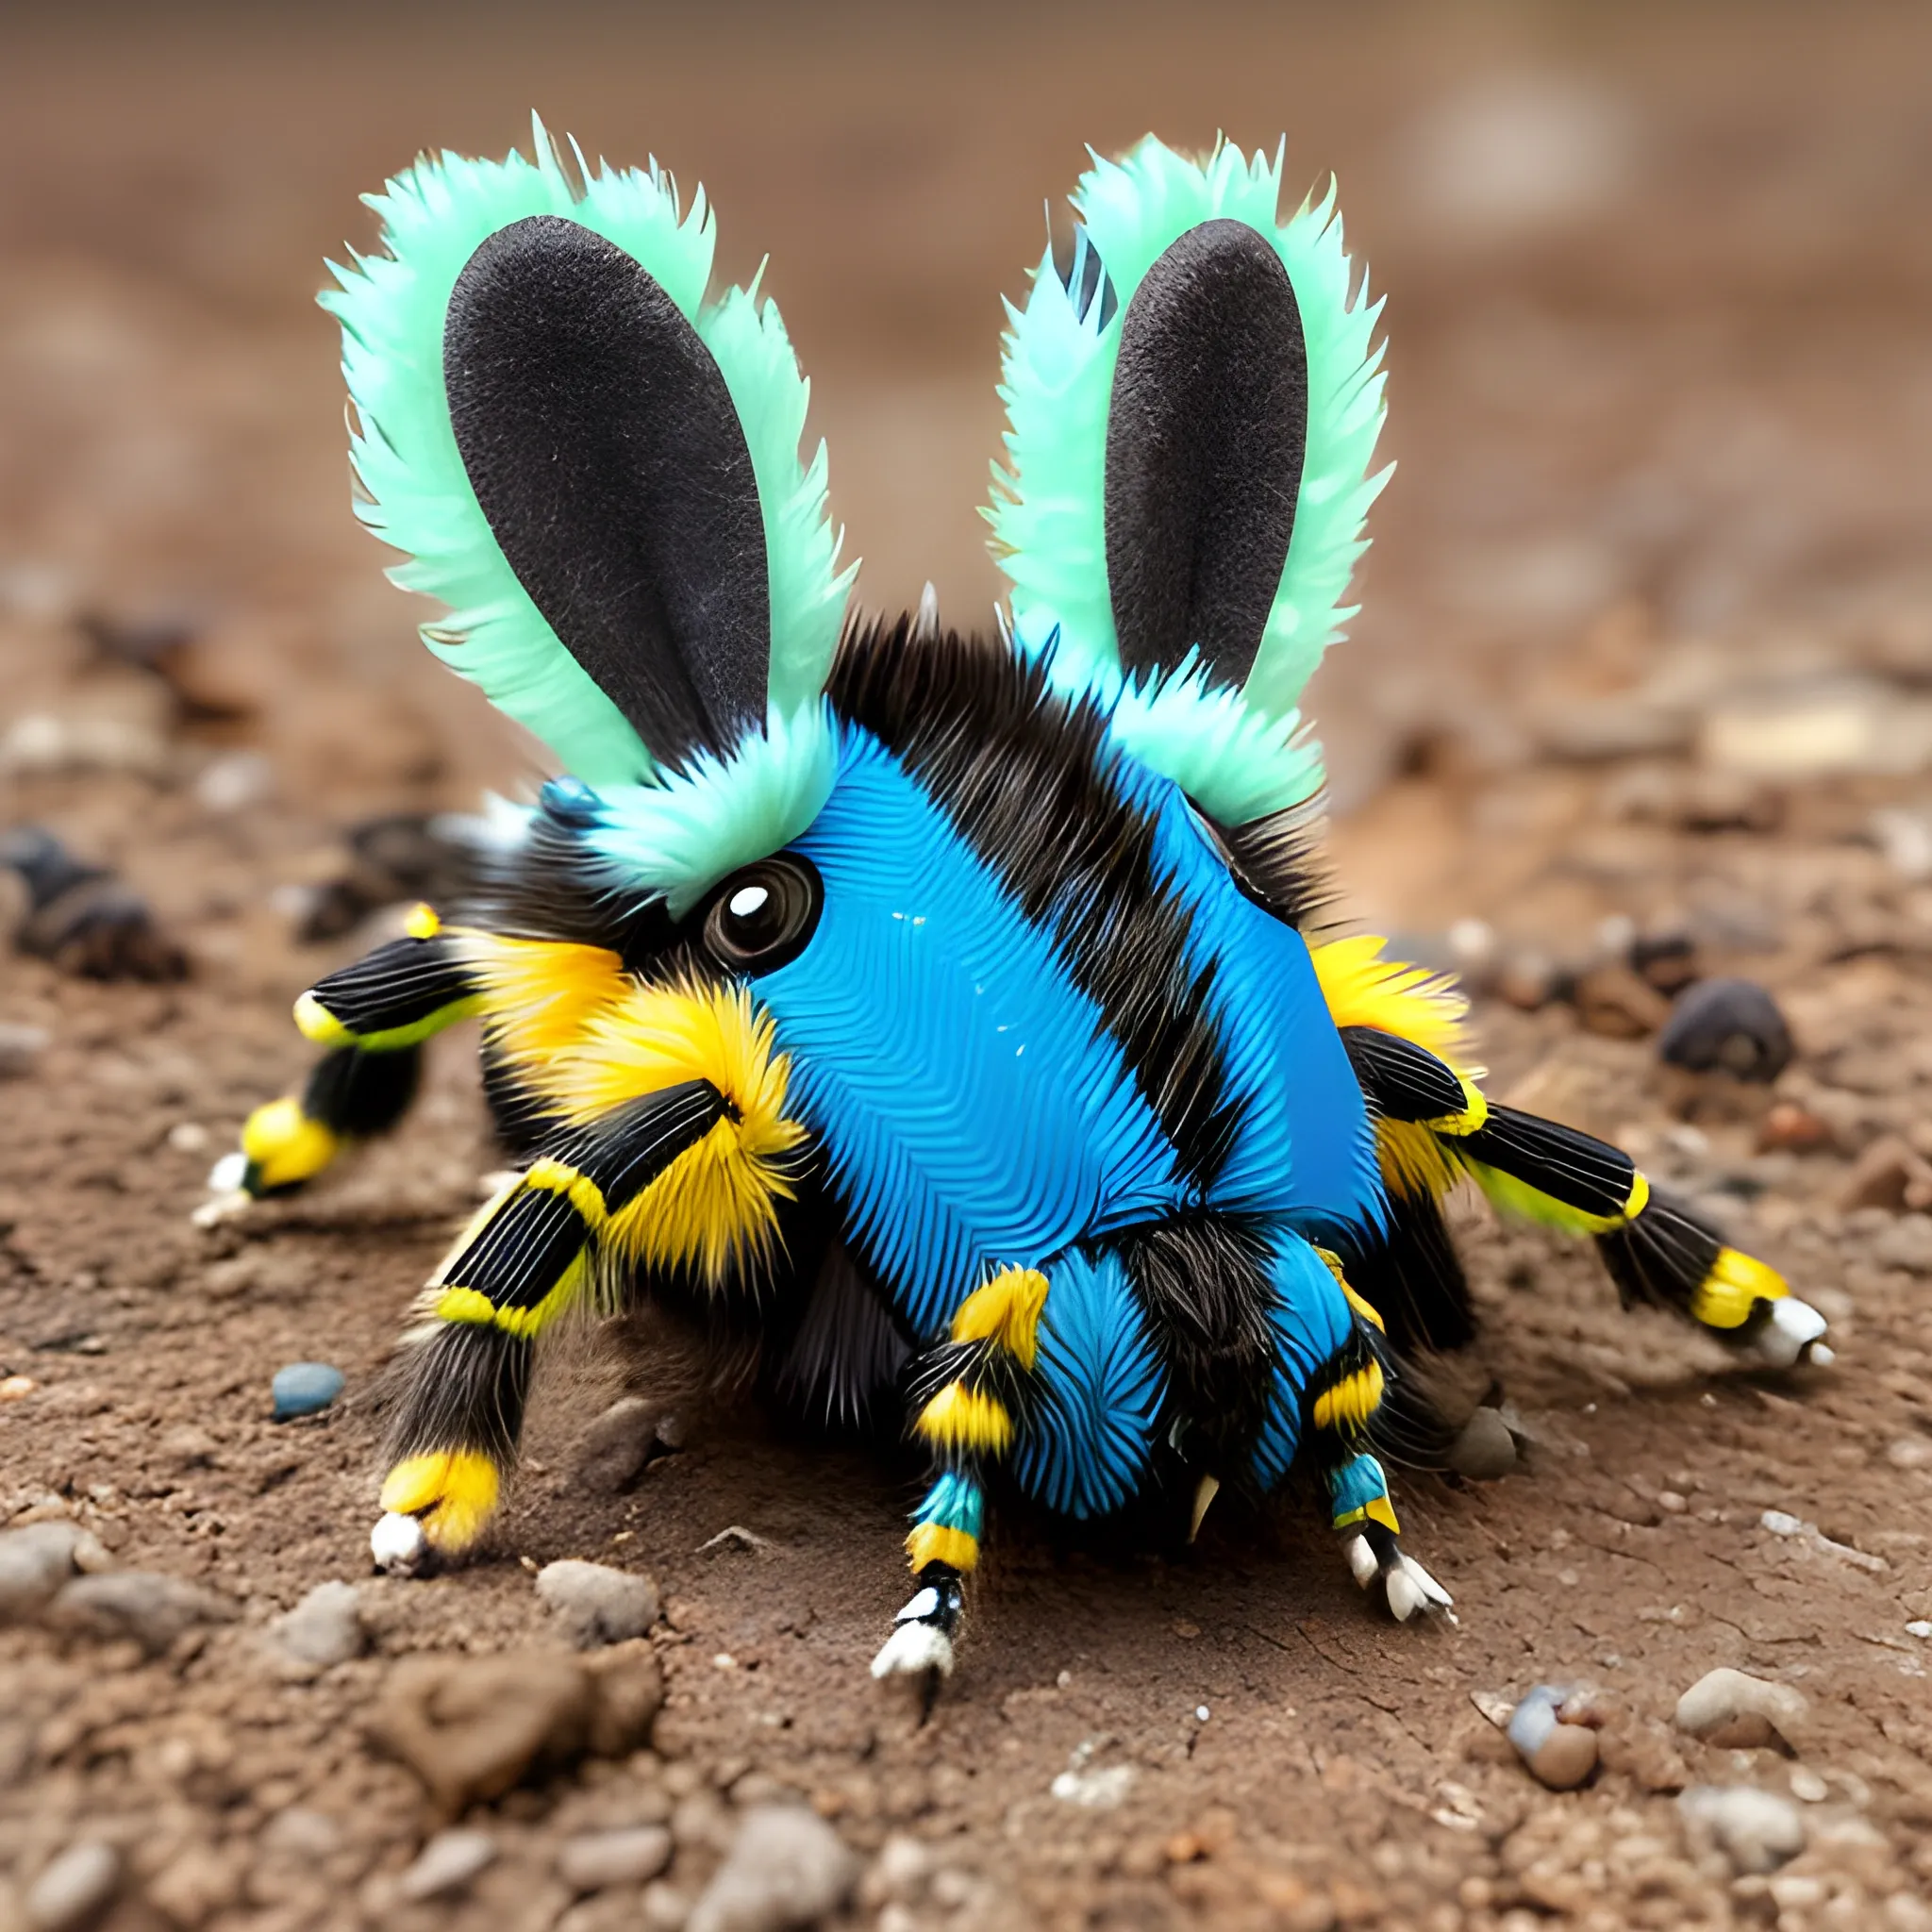 Insectile furry fluffy feline hybrid of rabbit and bumblebee, with blue and green and white stripes, with predatory mandibles and segmented body and six jointed legs with tube feet, with brightly coloured eggs, on rough scrubland, at night, very detailed